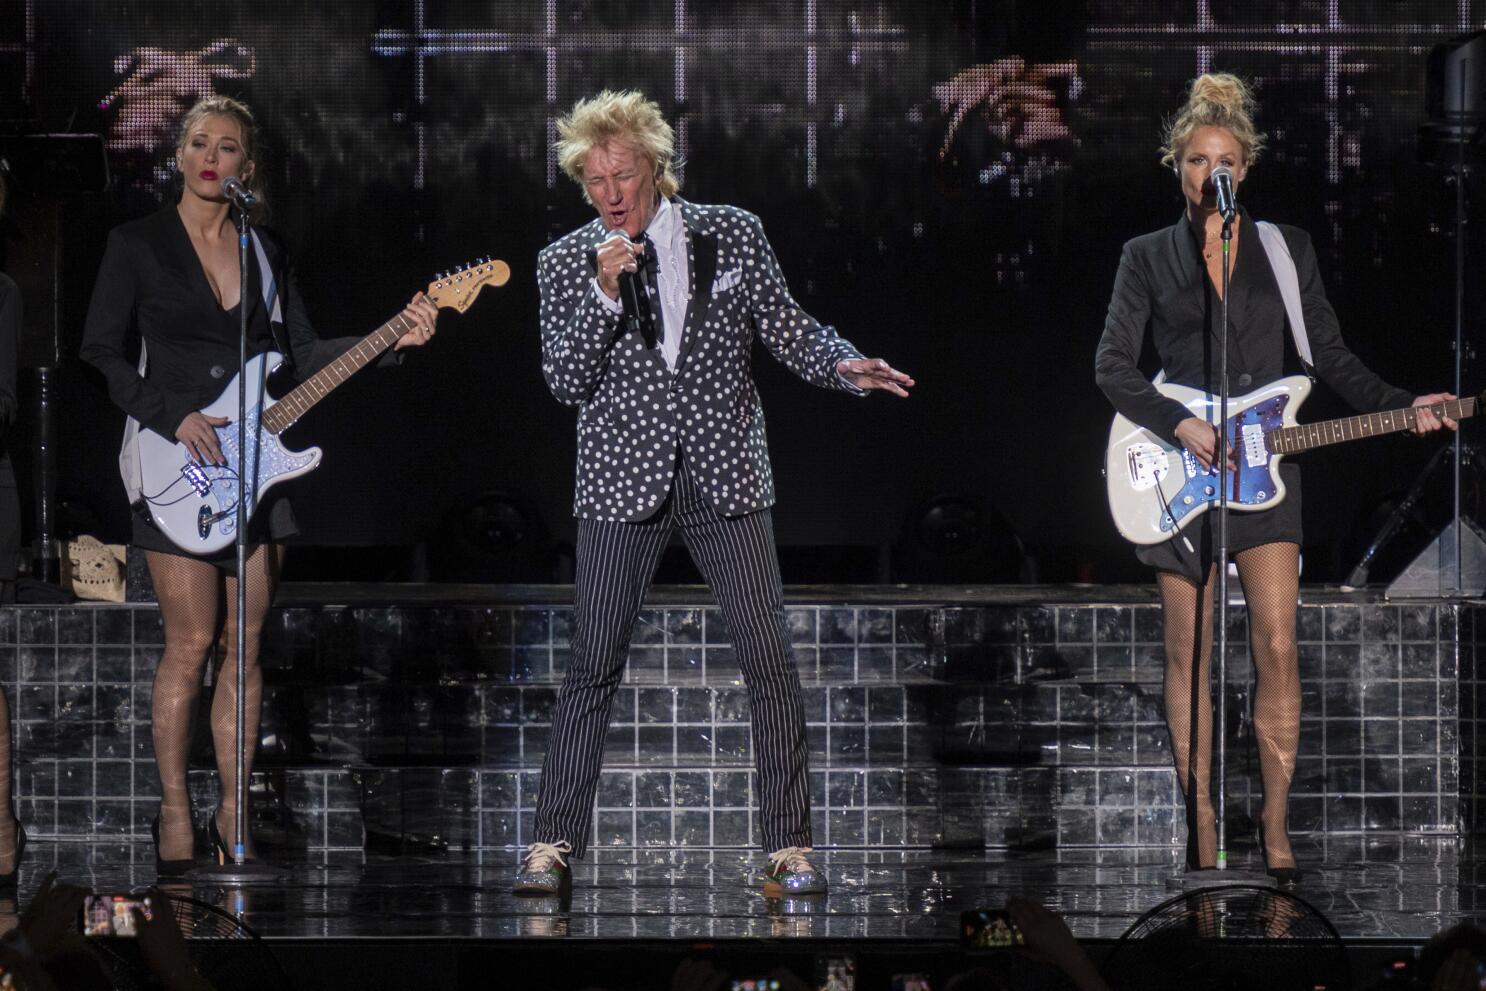 Rod Stewart planning to leave all the rock 'n' roll stuff behind after  2023 tour